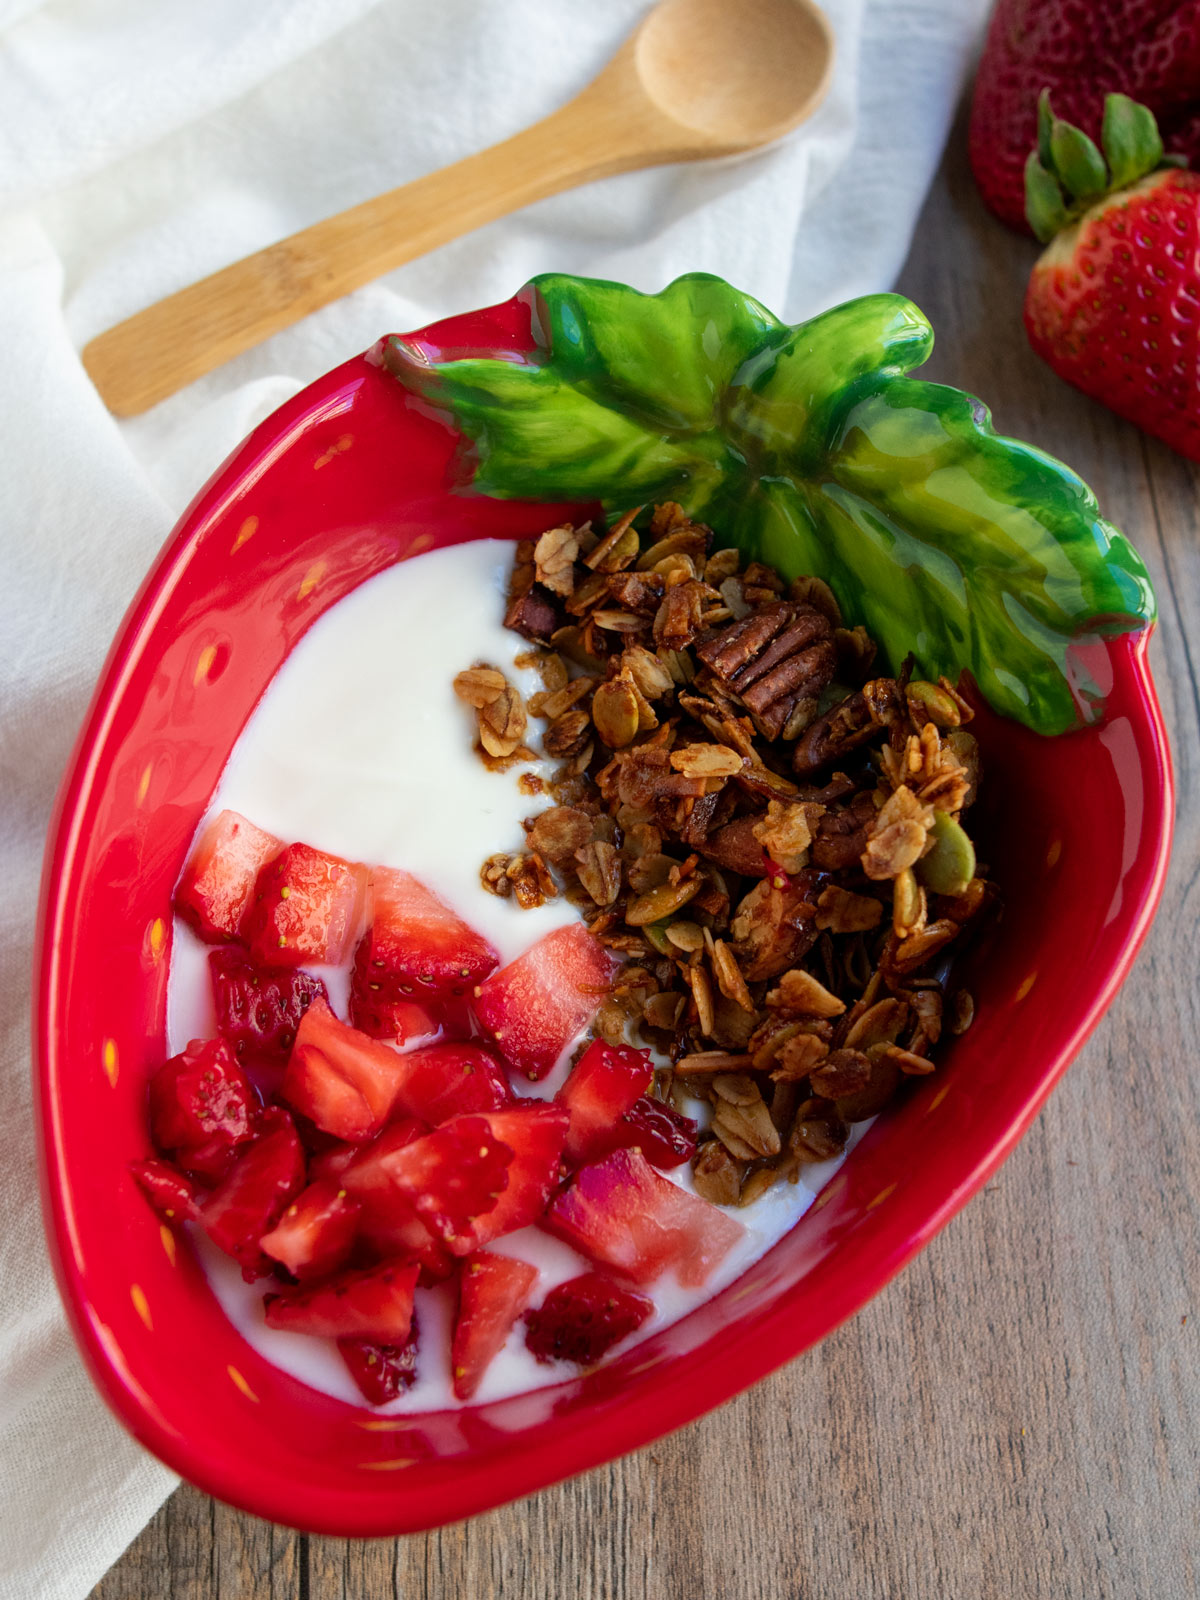 Olive oil granola in a strawberry red bowl on top of yogurt with strawberries on top as well.